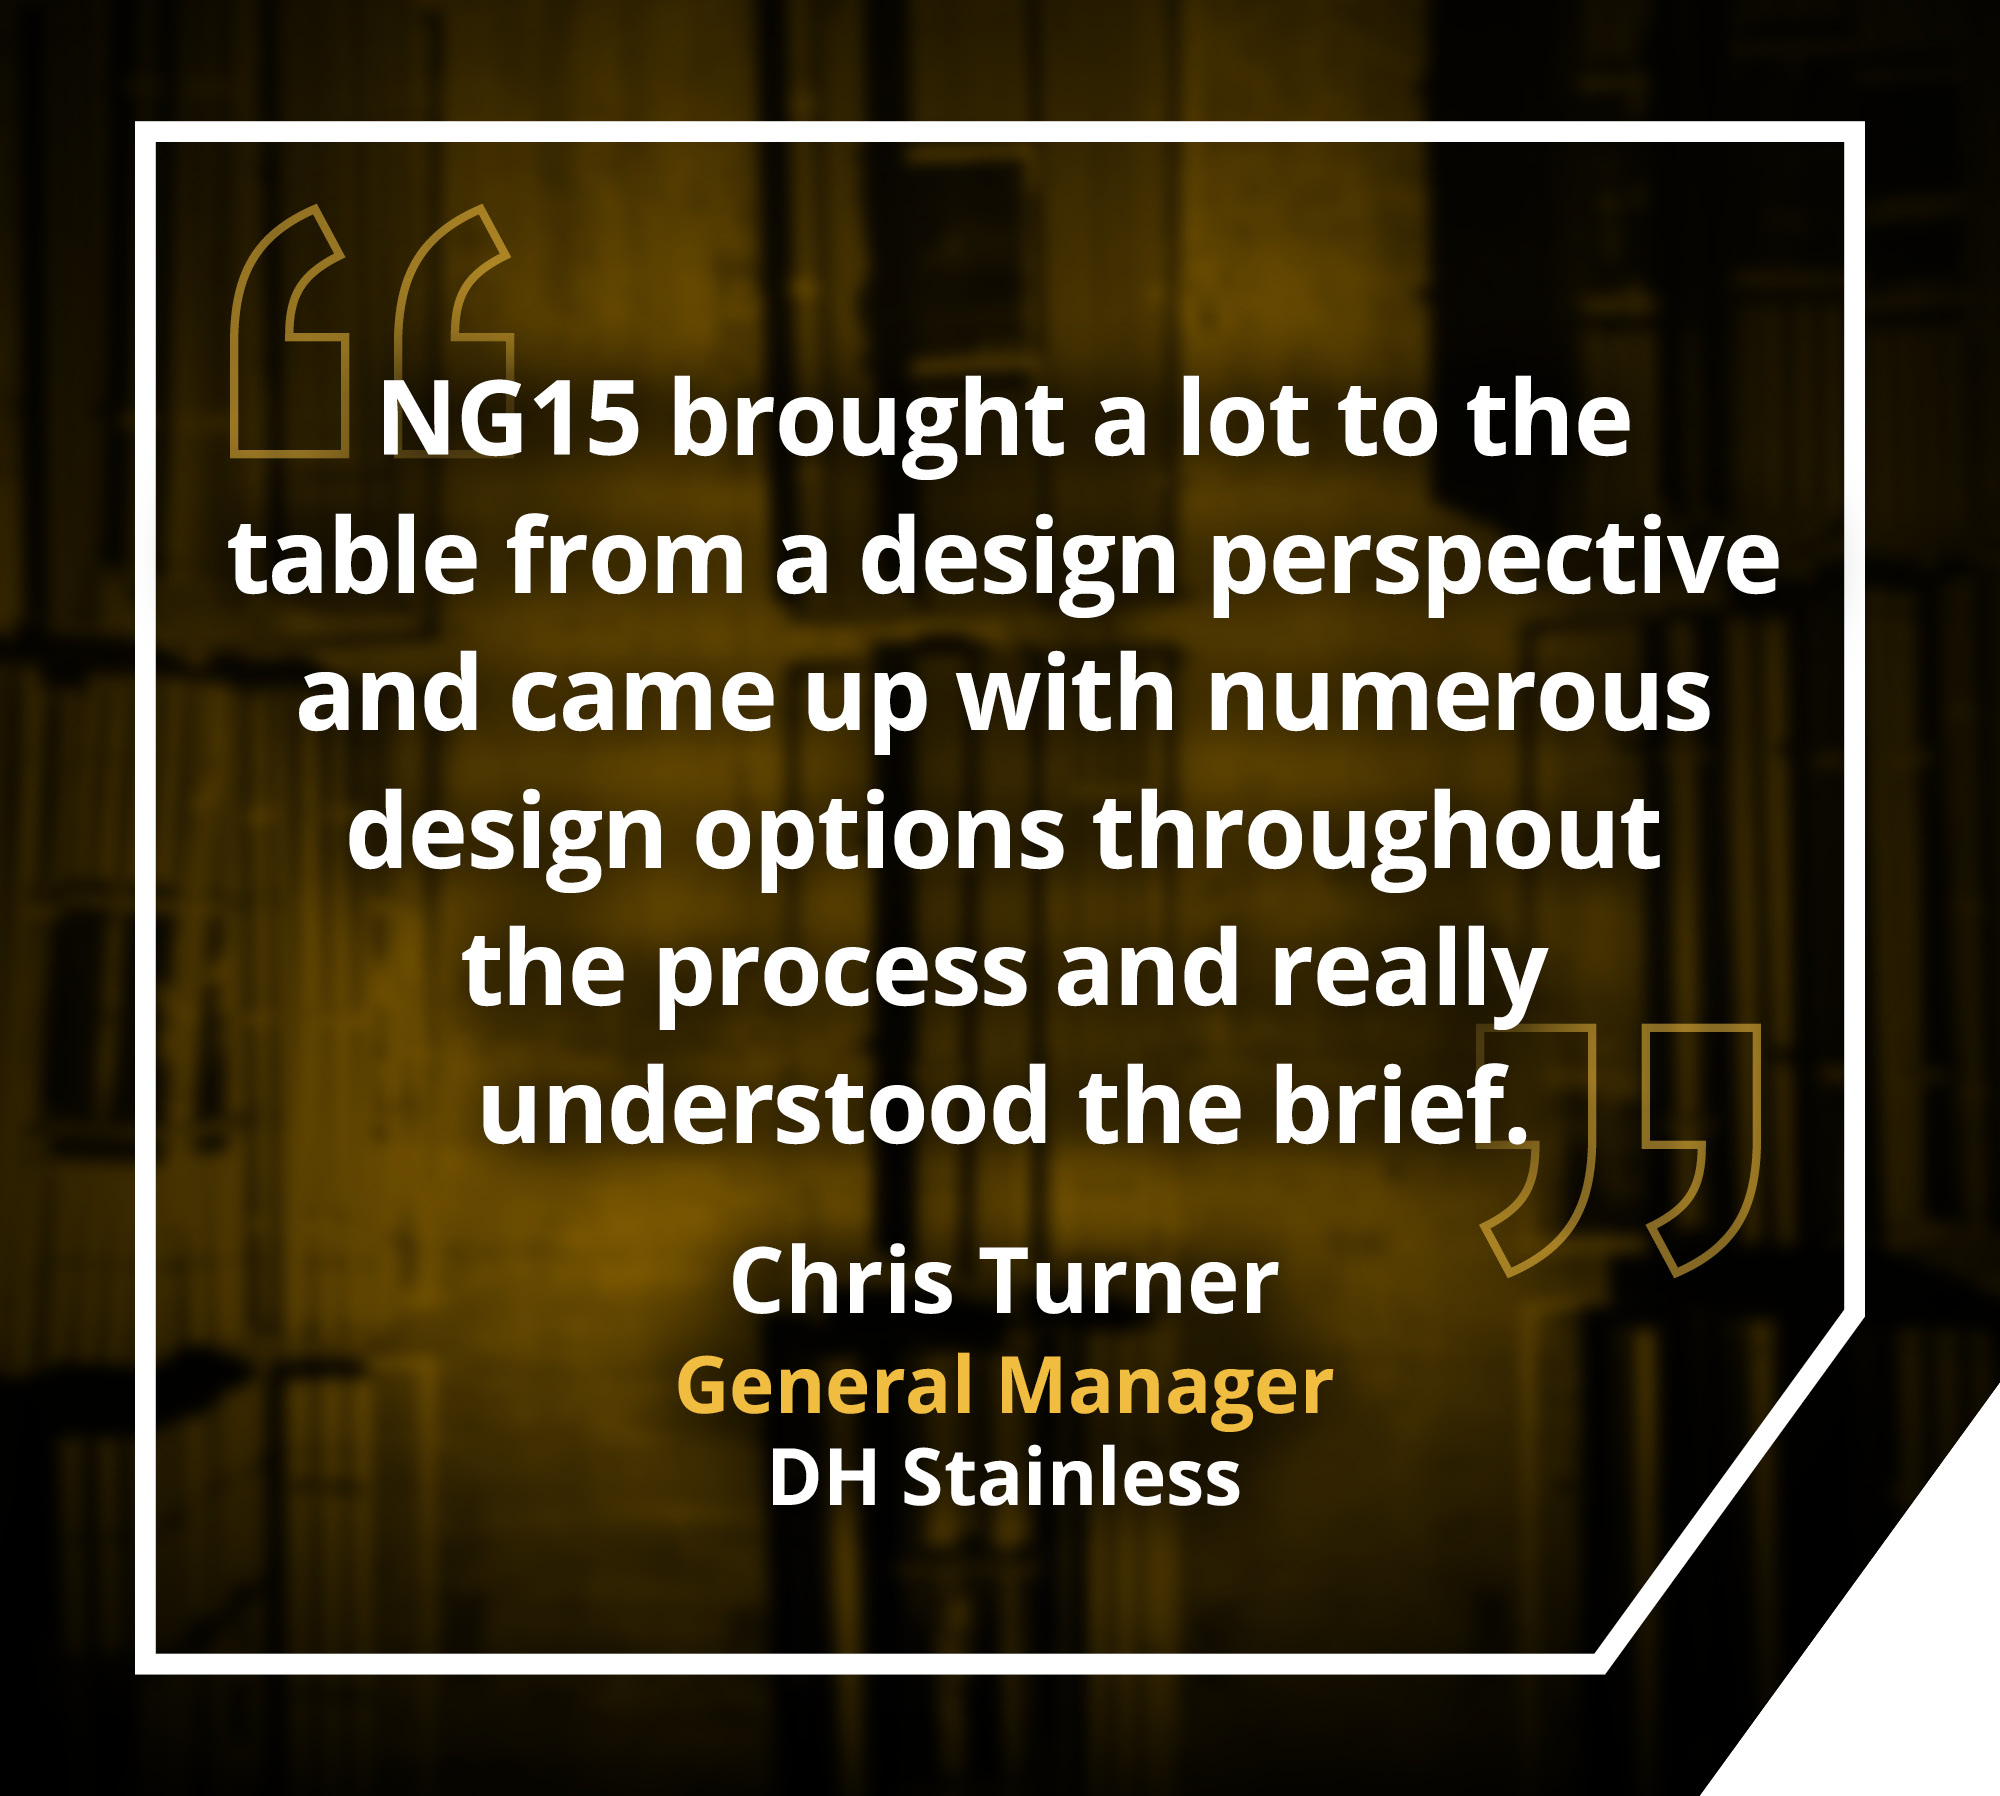 Quote by Chris Turner, General Manager for DH Stainless: NG15 brought a lot to the table from a desig perspective and came up with numerous design options throughout the process and really understood the brief.